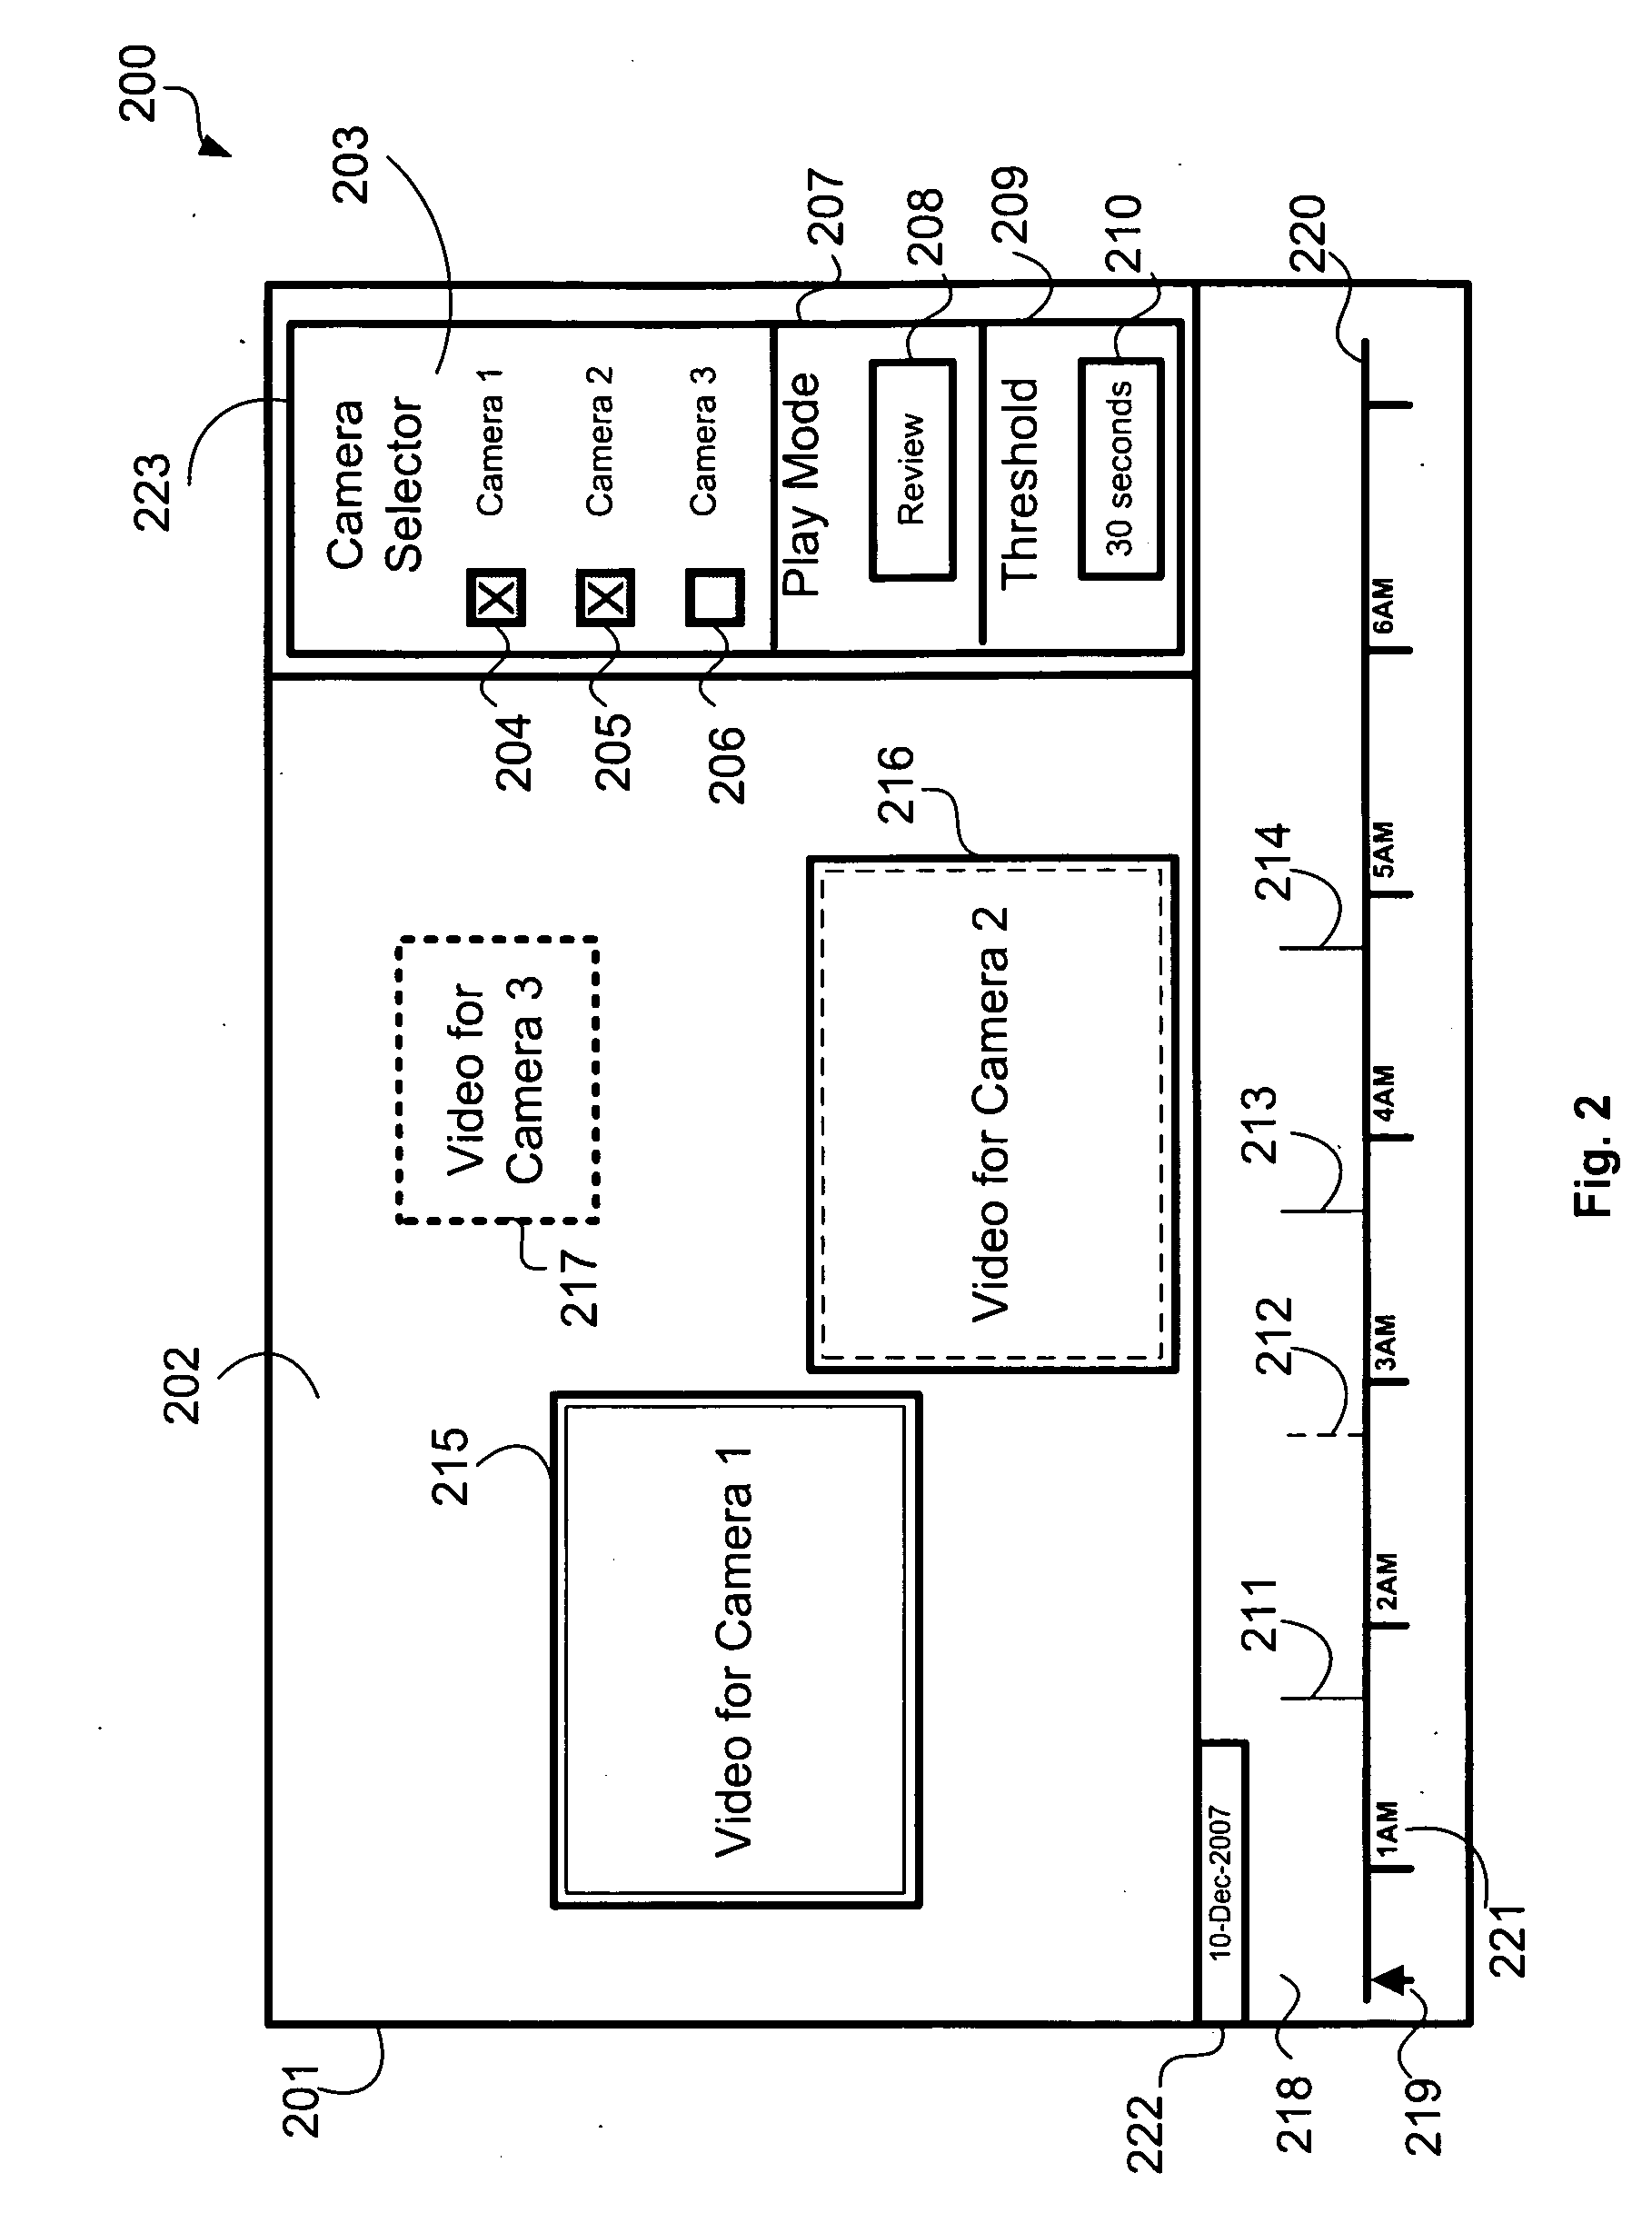 Method, apparatus and system for displaying video data